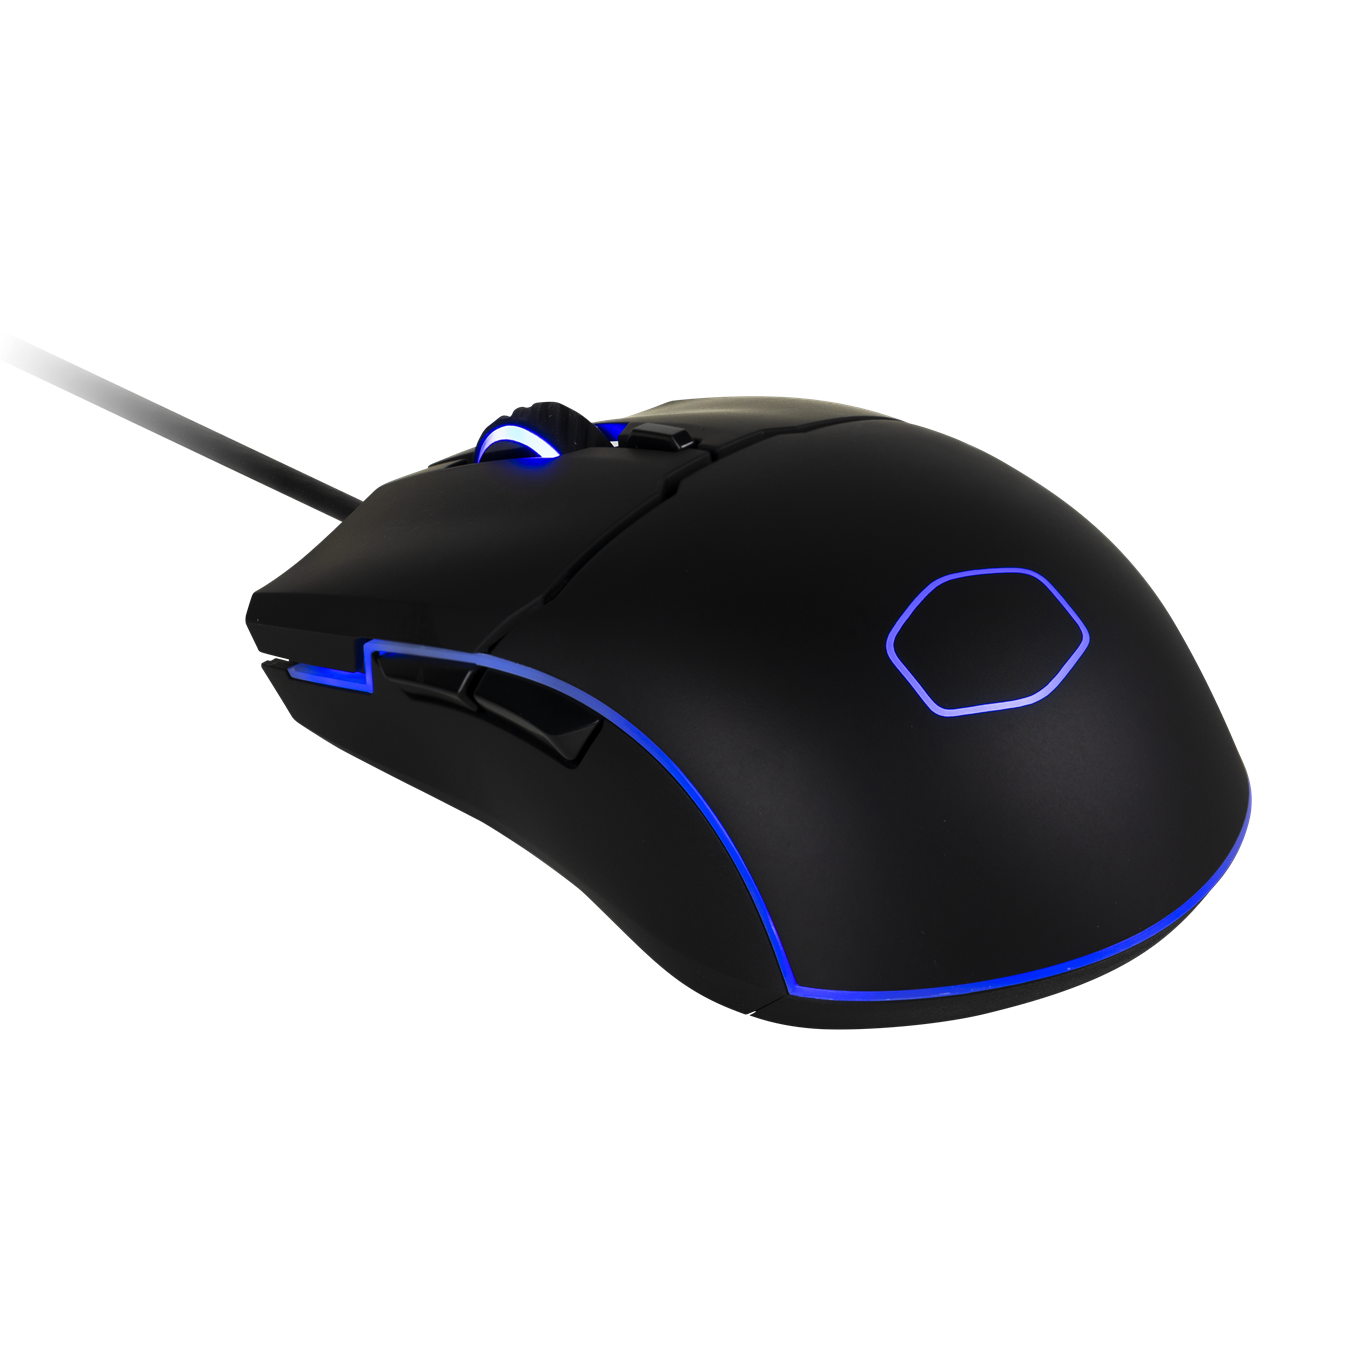 CM110 Gaming Mouse - Adjustyour DPI On-the-Fly with five programmedlevels (400, 800, 1600, 3200, 6000)